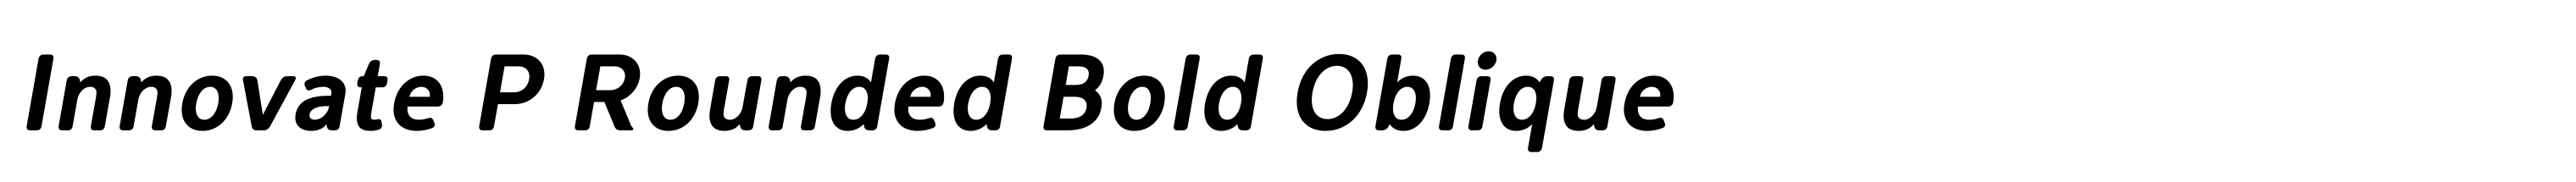 Innovate P Rounded Bold Oblique